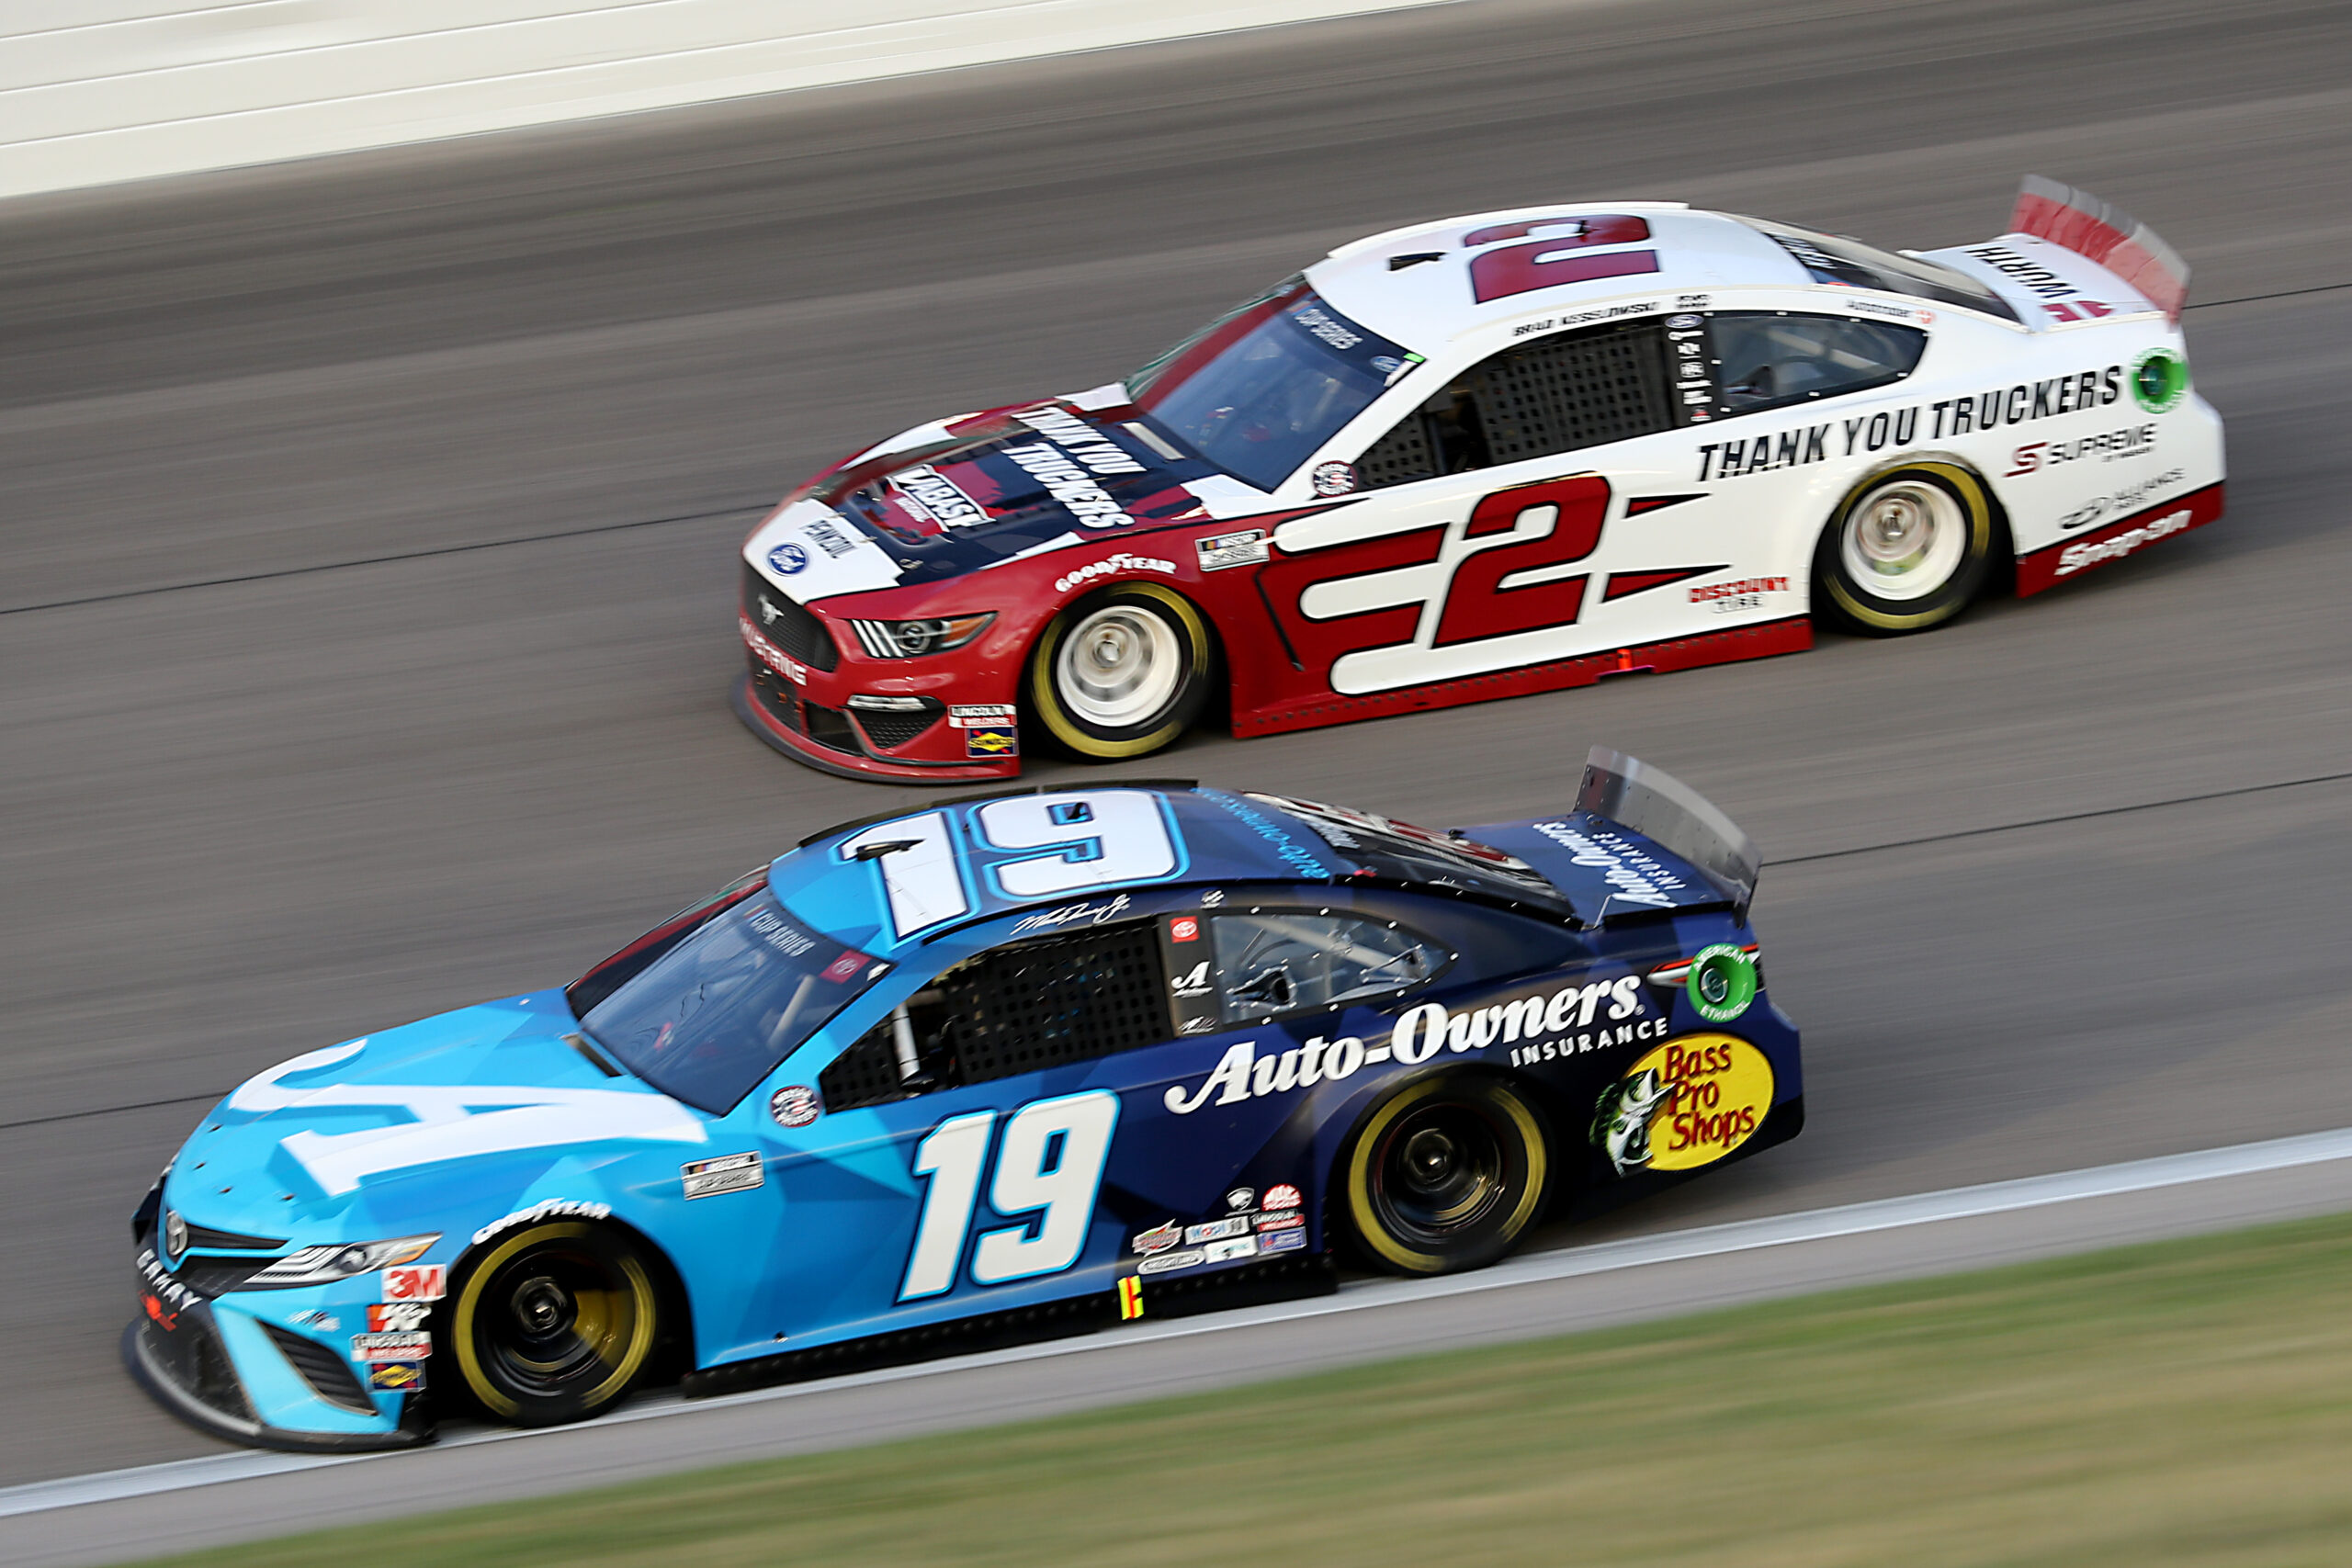 Could Keselowski and Truex race their way into the Championship 4?  (Photo Credit: Jamie Squire/Getty Images)